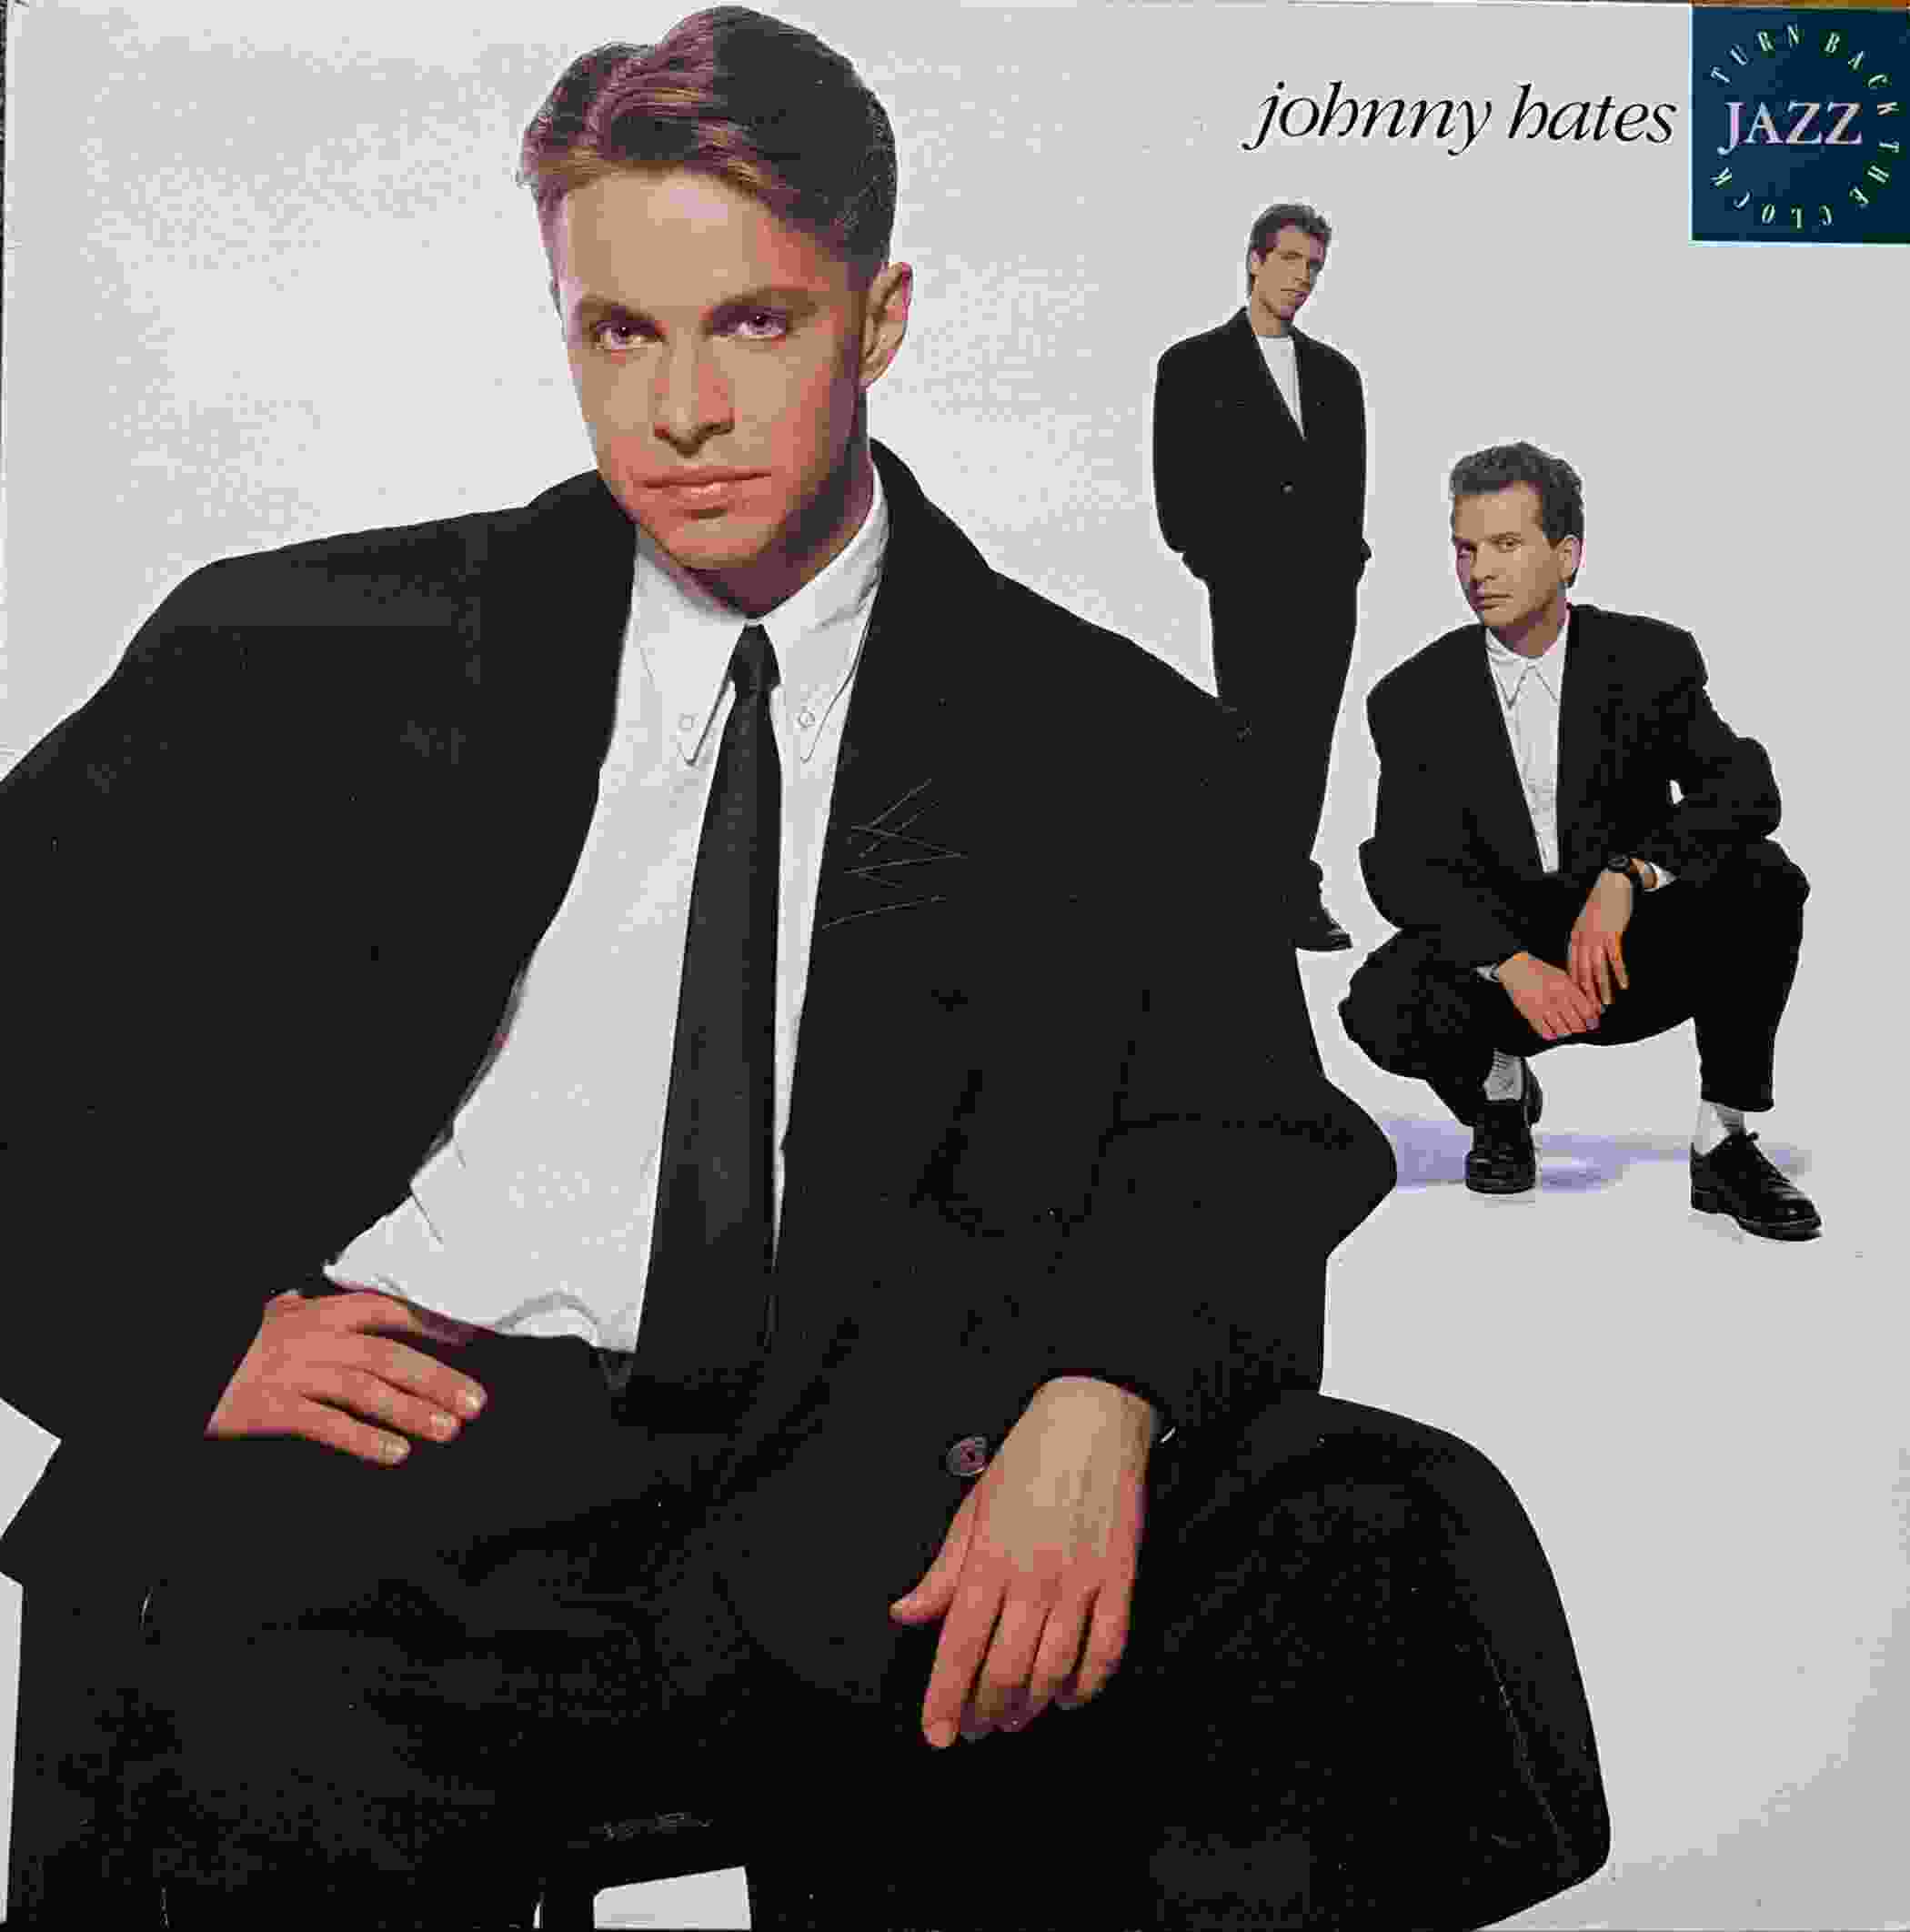 Picture of Turn back the clock by artist Johnny Hates Jazz 